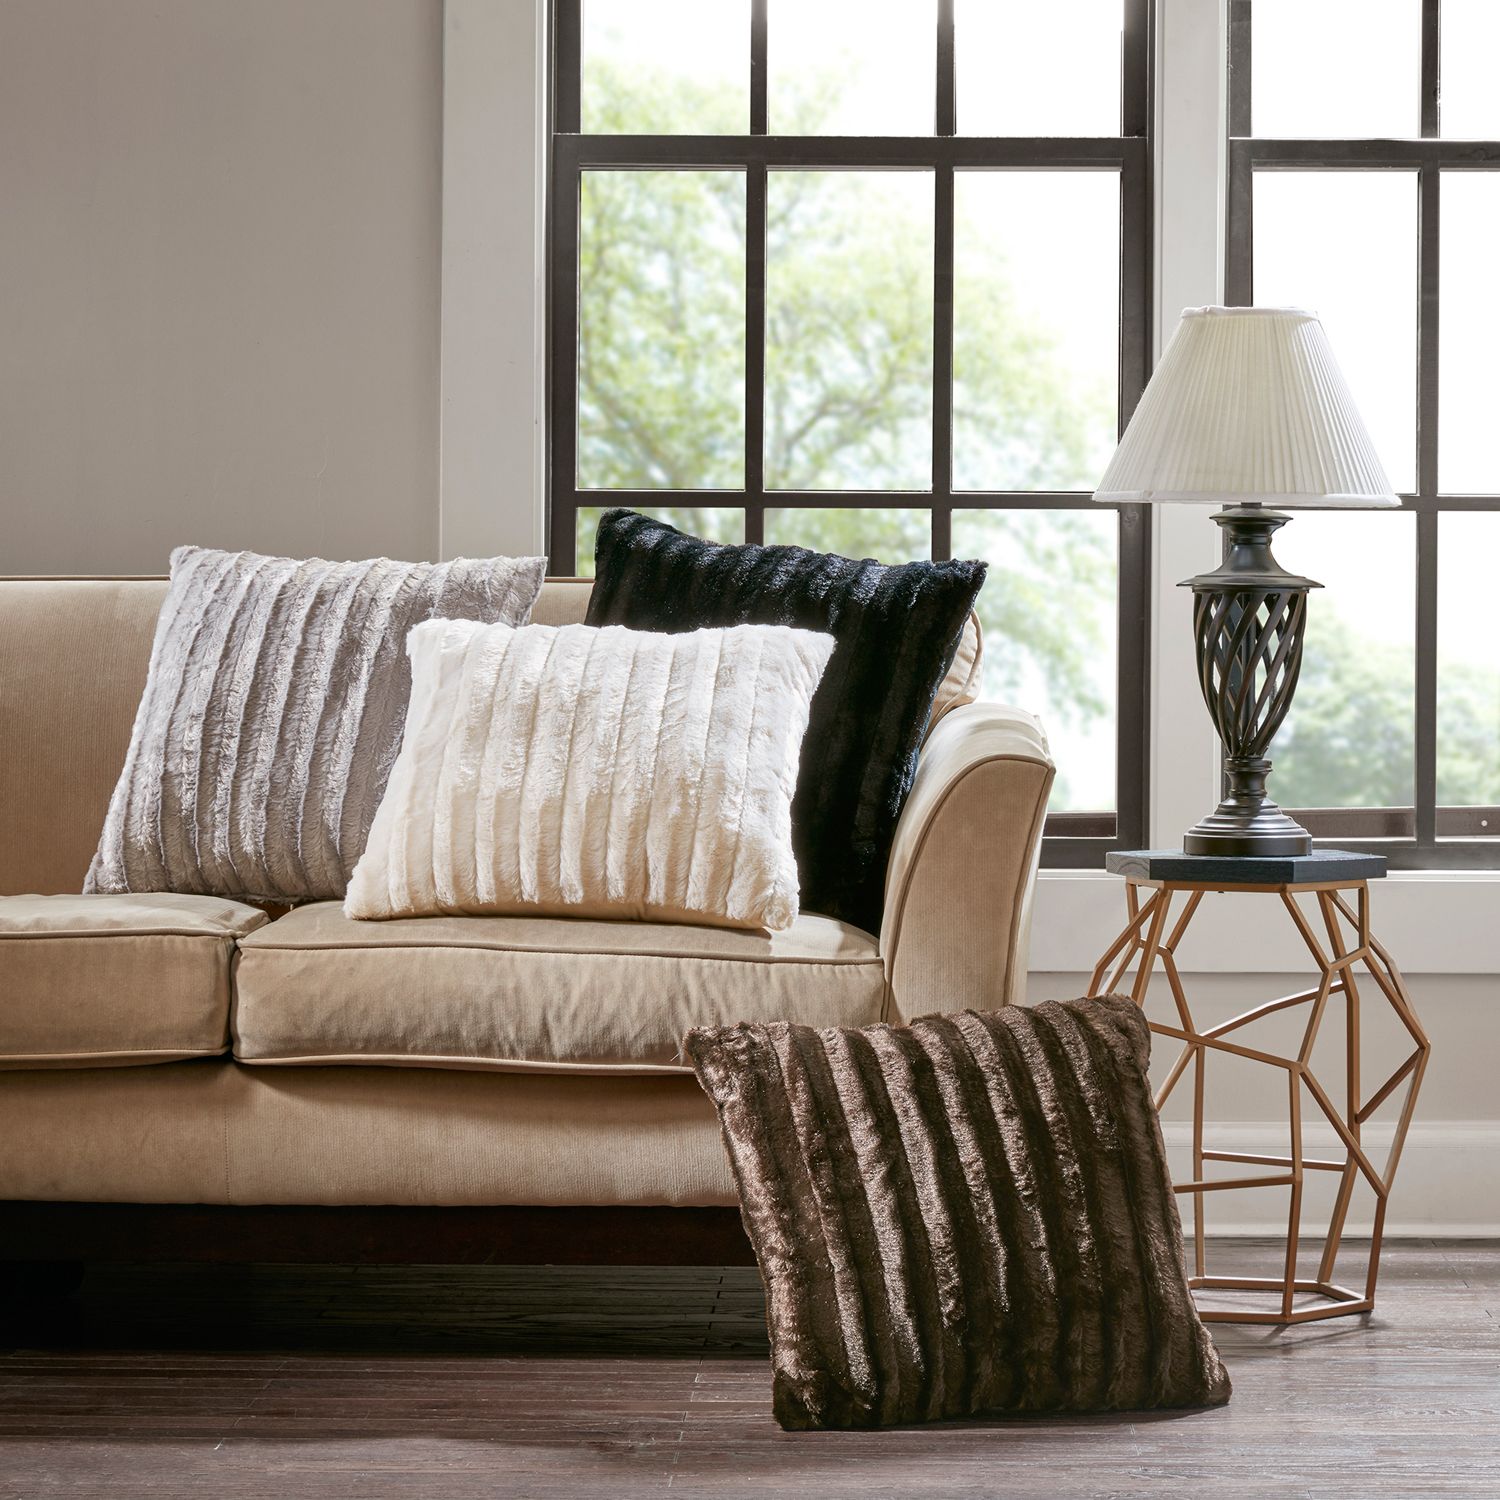 Embrace Comfort: Transform Your Home with Cozy Home Décor Essentials from Kohl’s